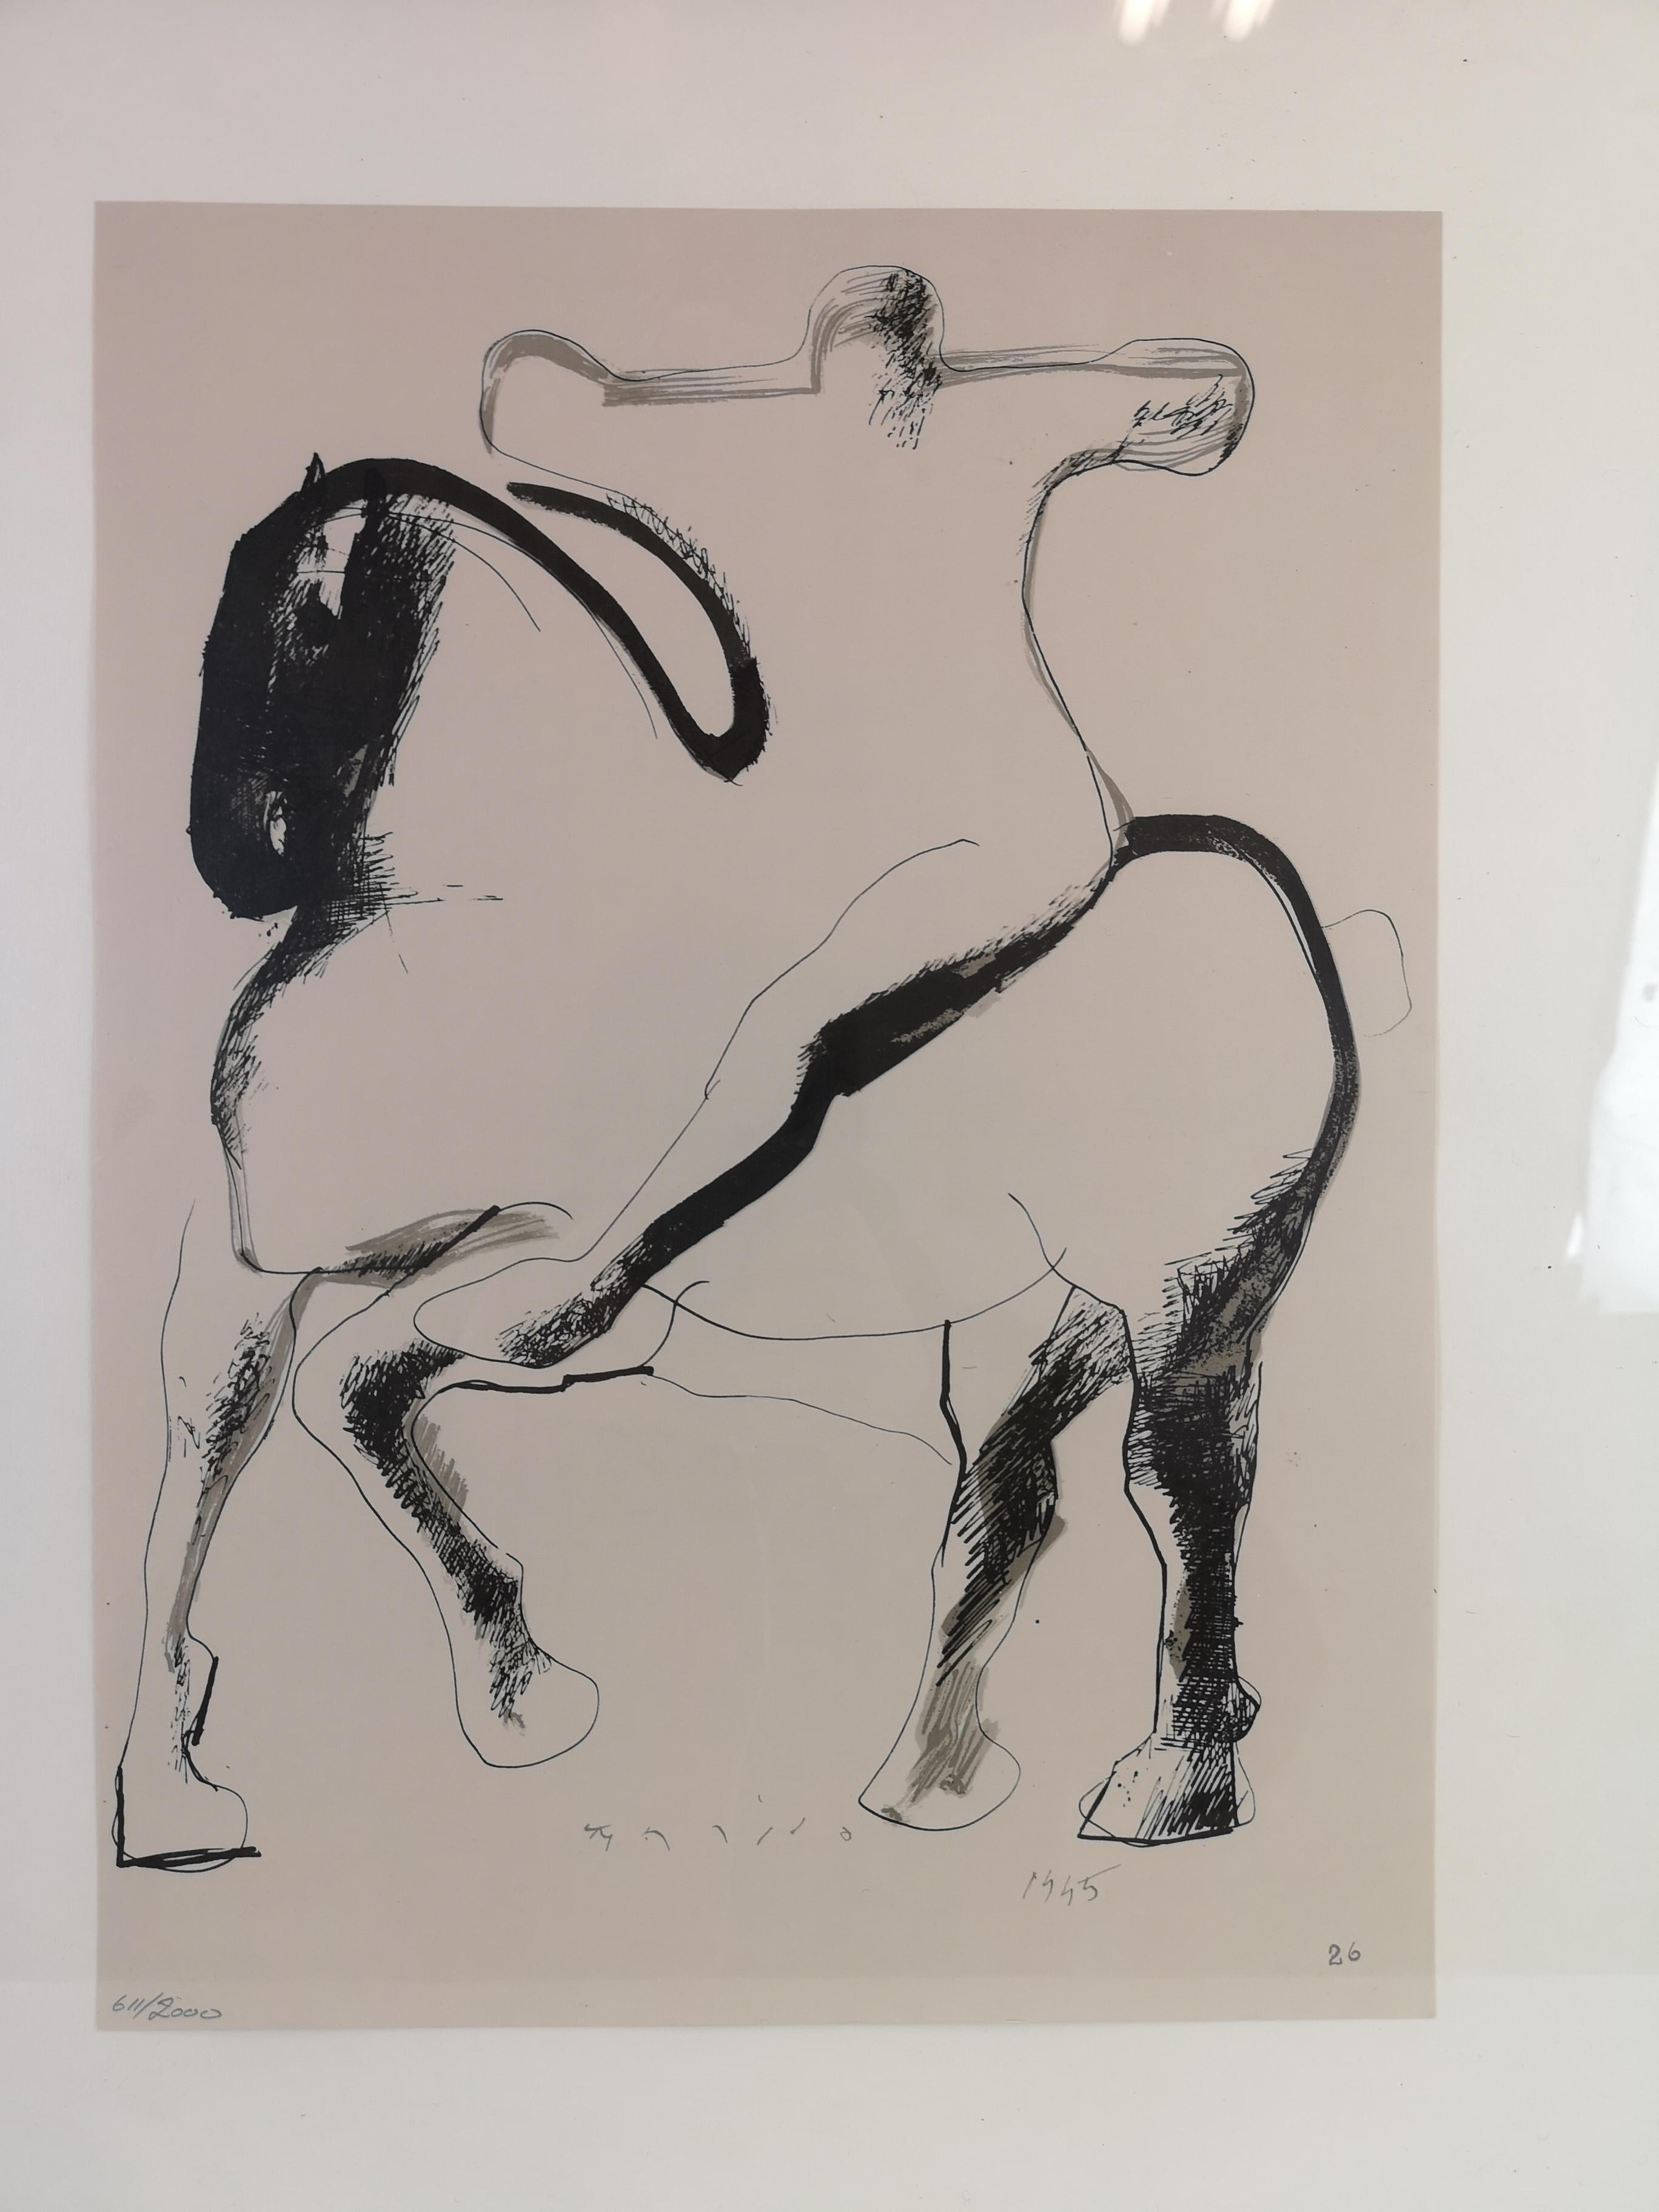 Lithograph after a drawing by Marino Marini, from the Marino Marini portfolio by Werner Haftmann titled 